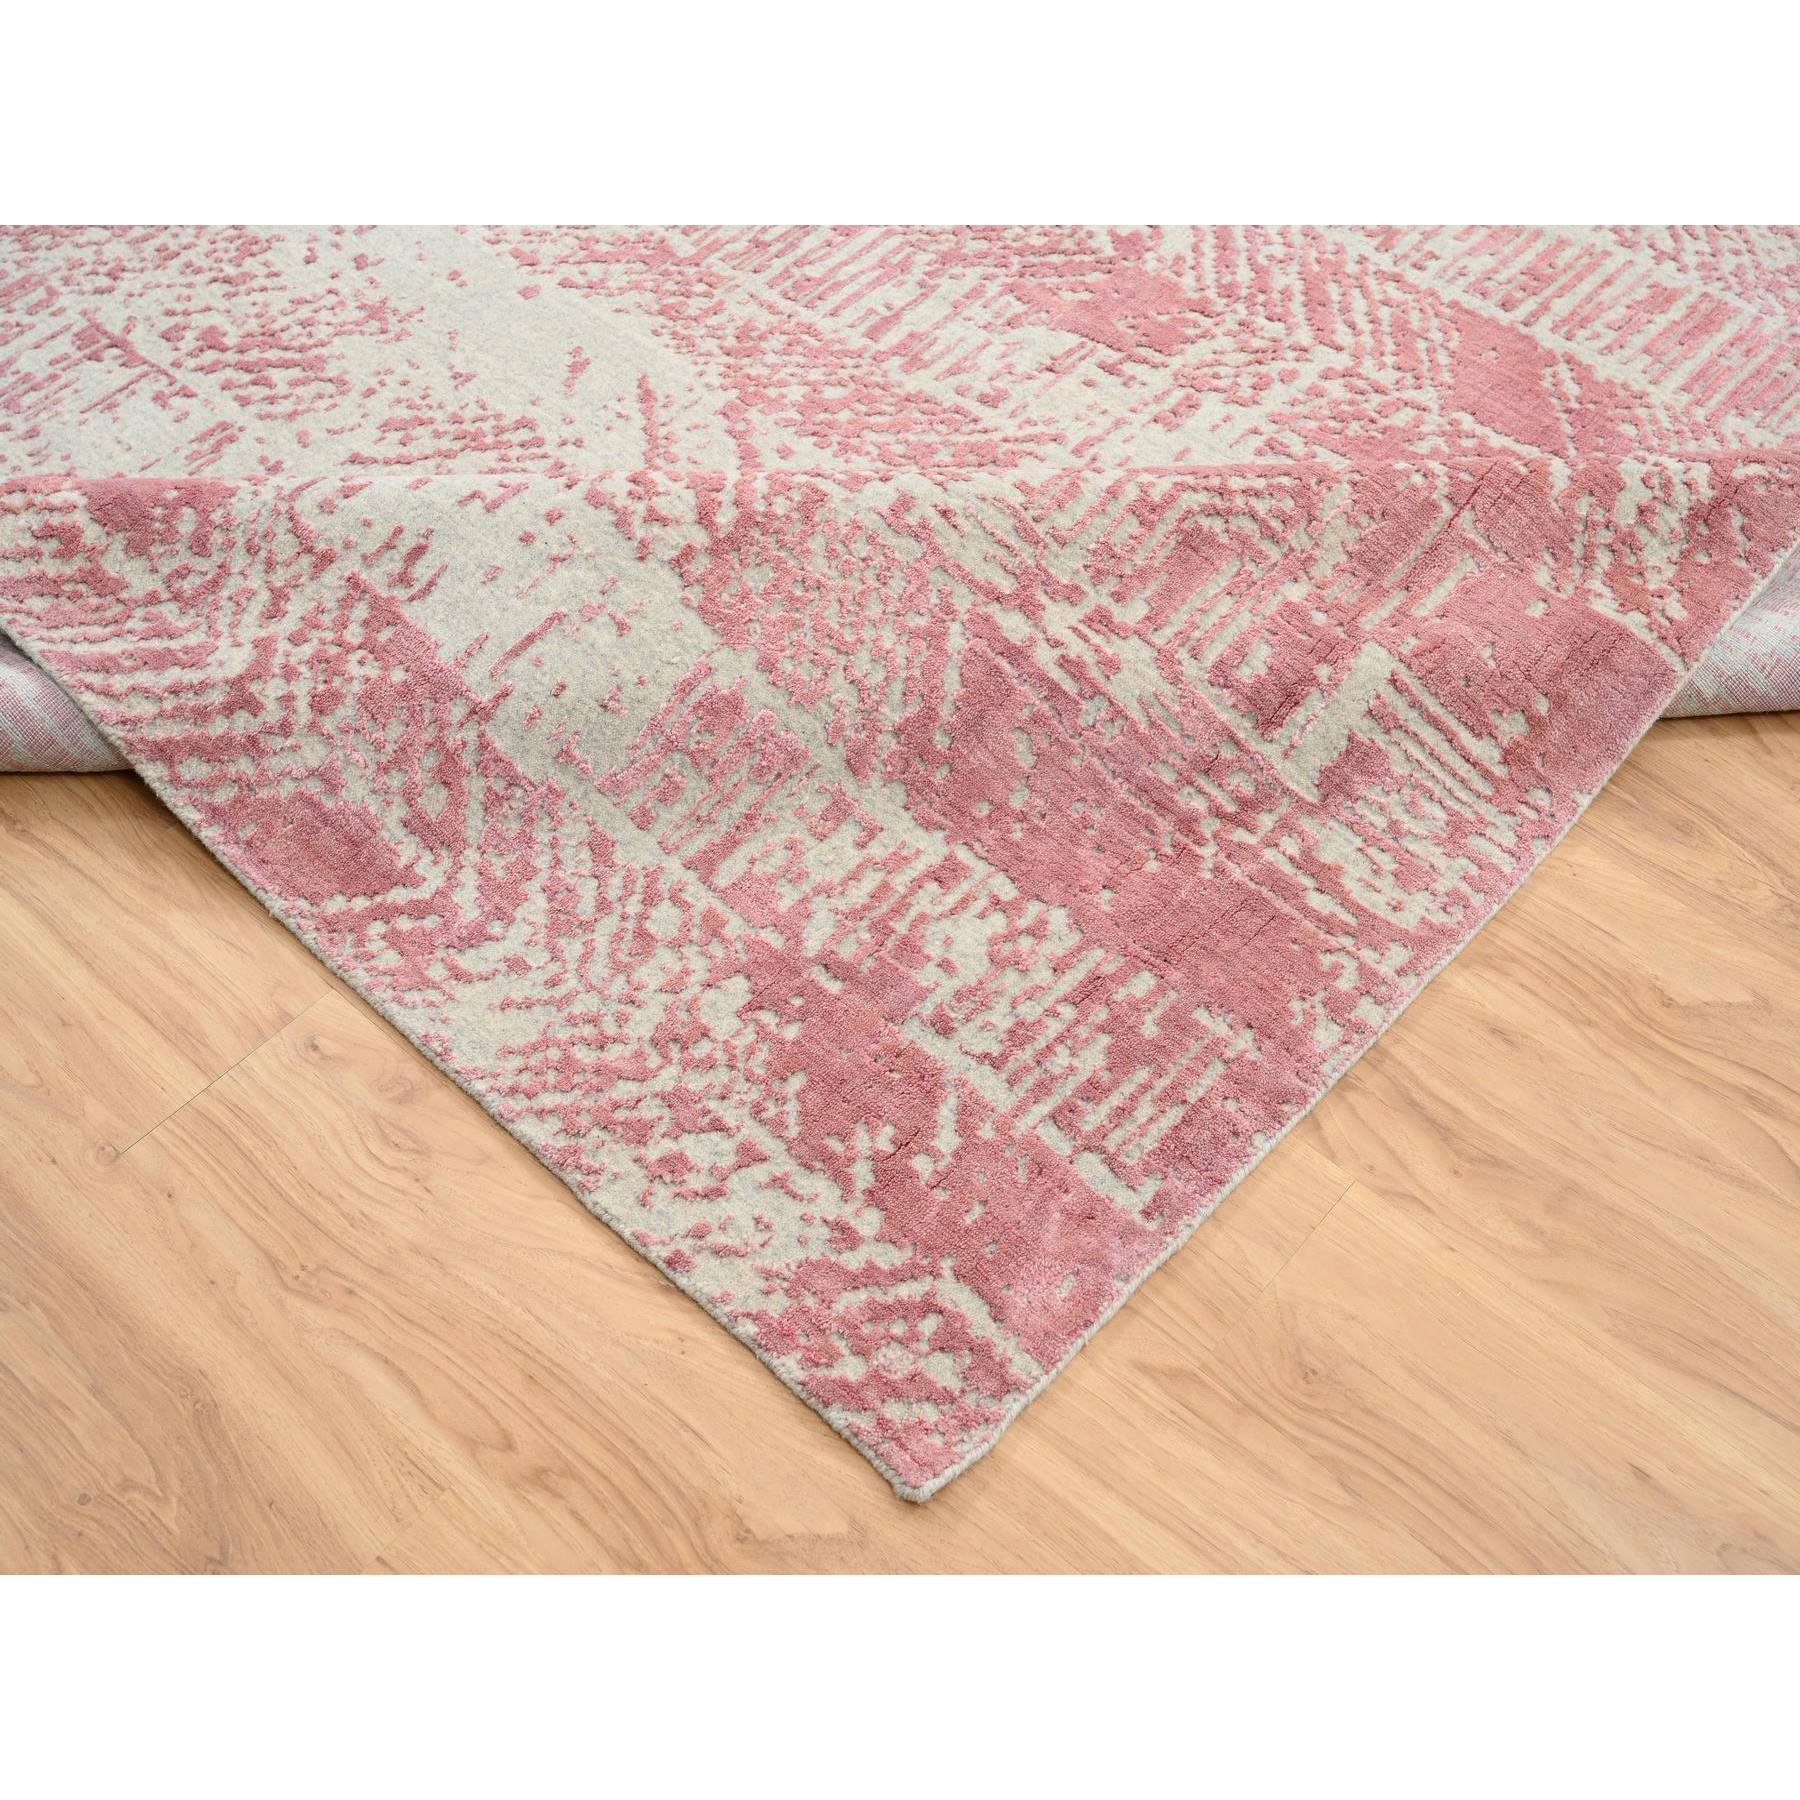 11'10"x15'1" Rose Pink, Jacquard Hand Loomed, All Over Design Wool and Art Silk, Oversized Oriental Rug 